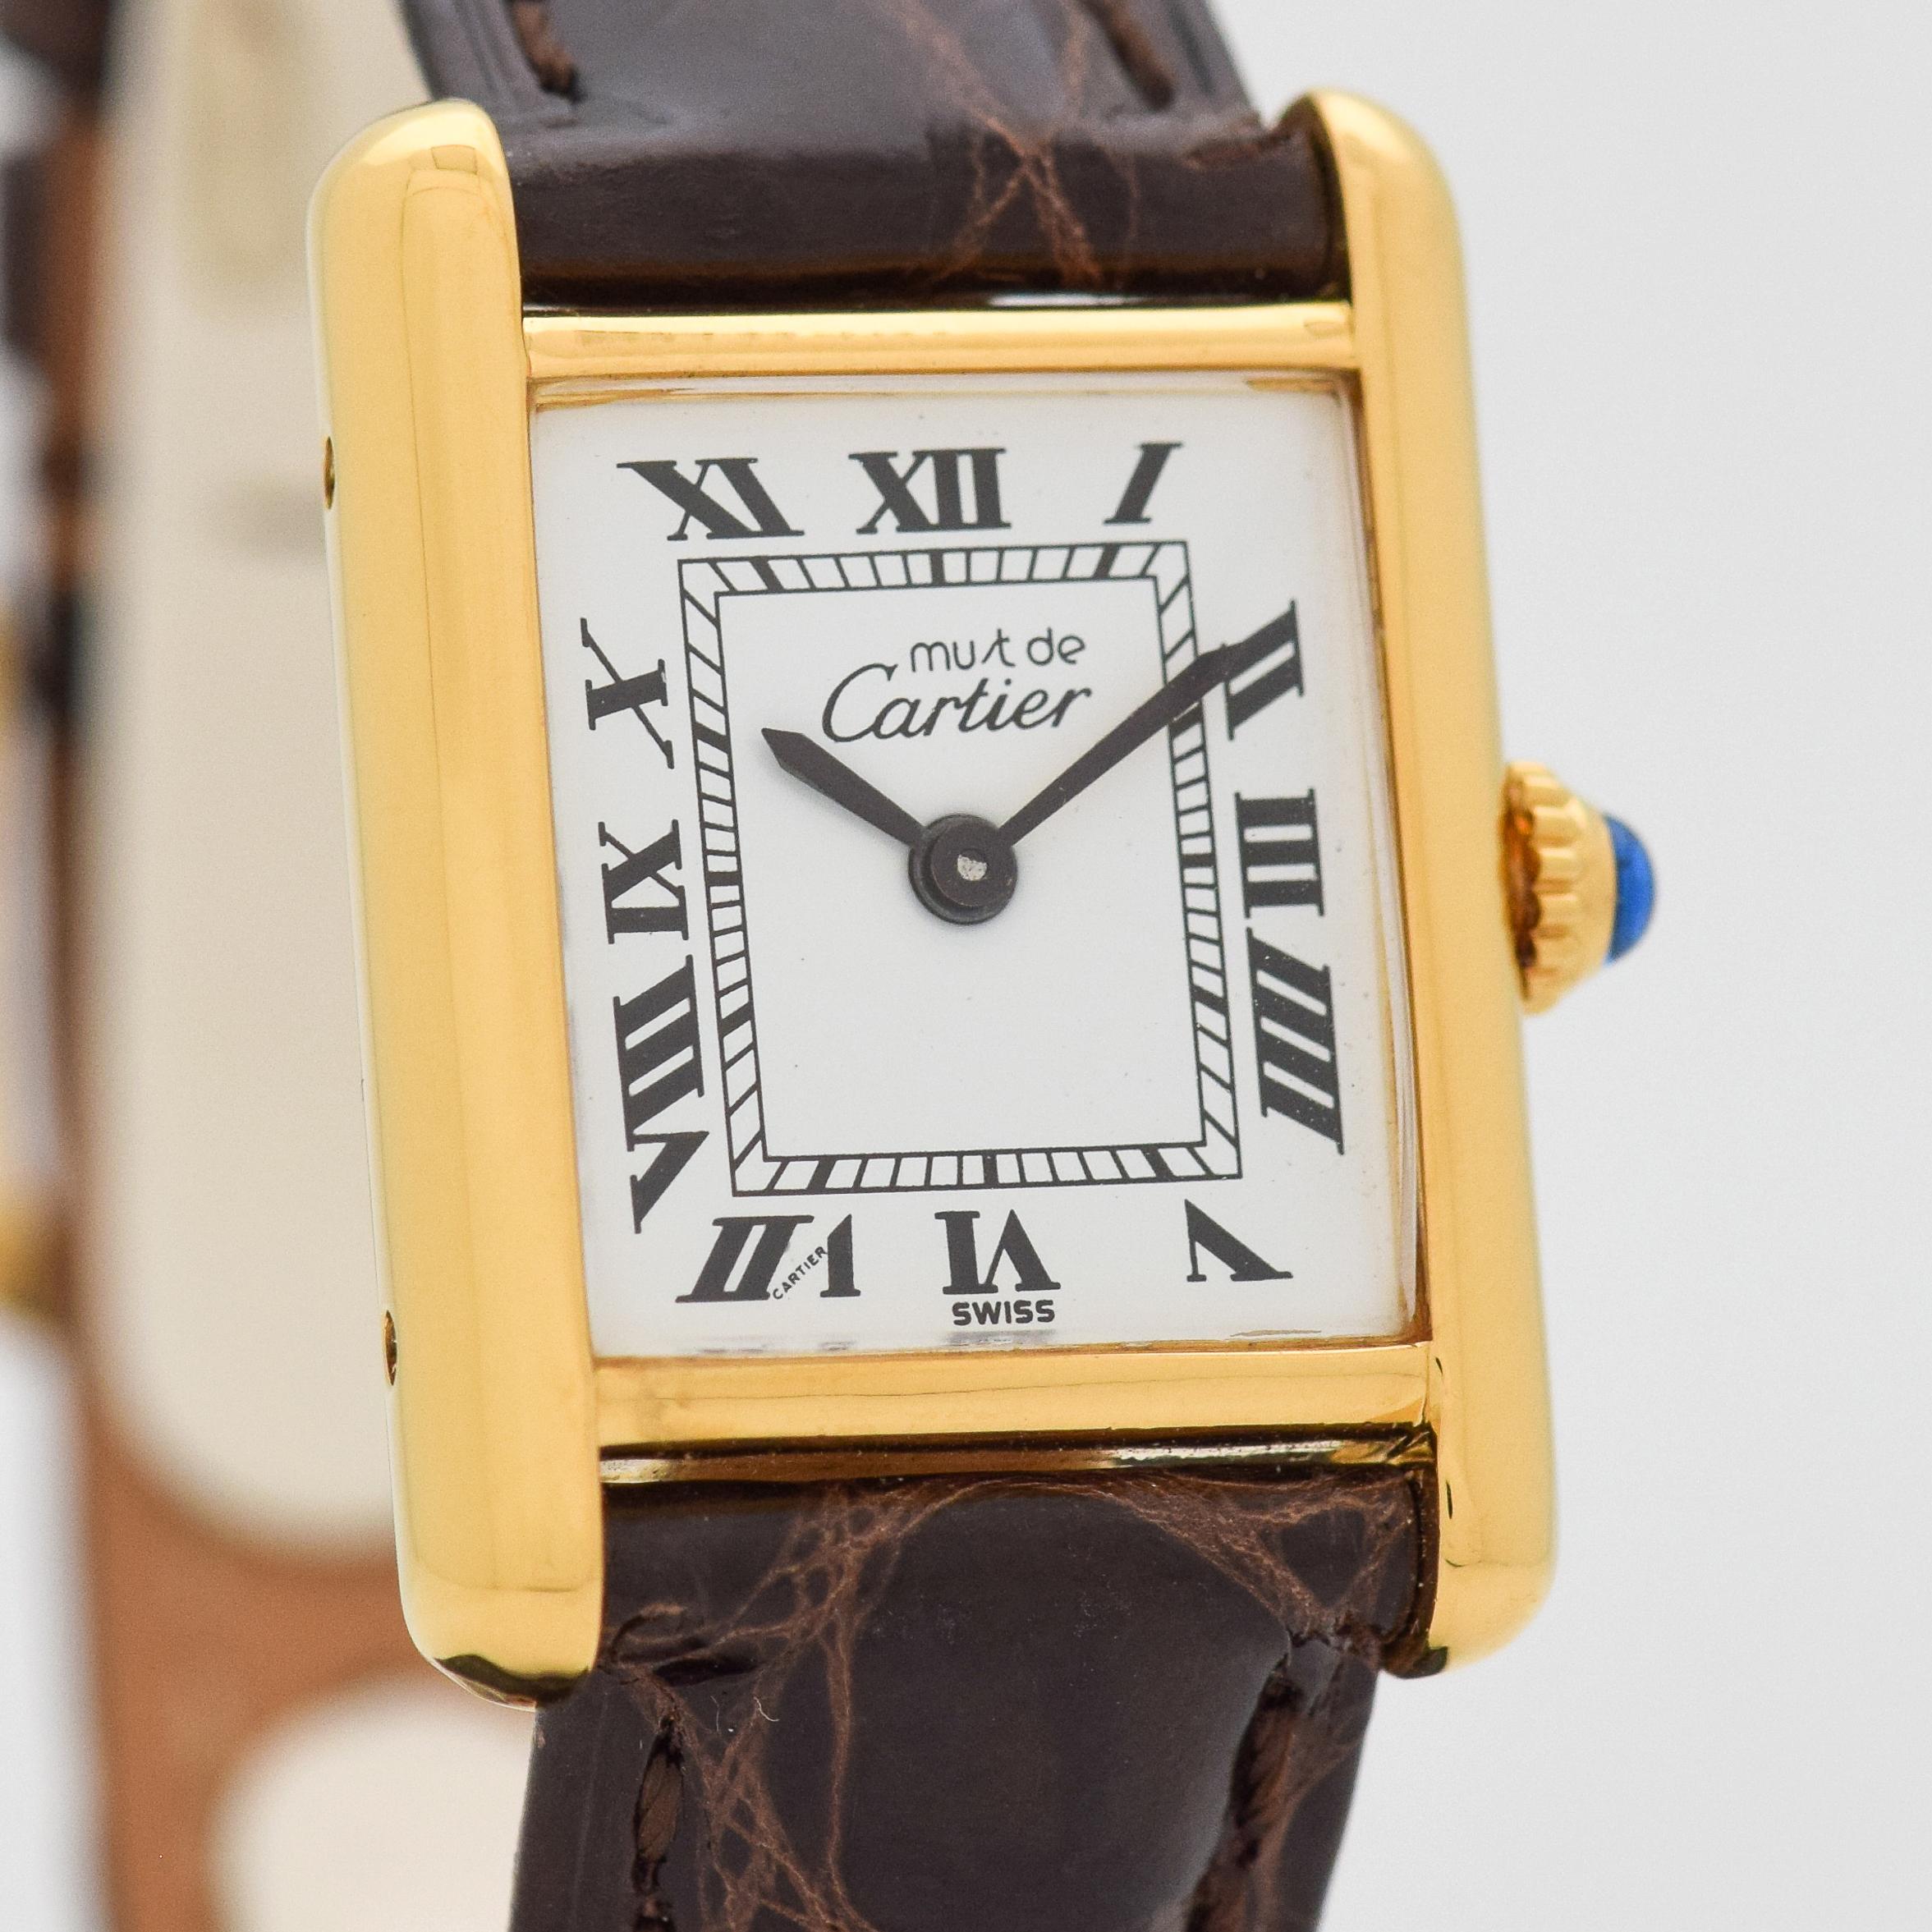 1980's era Cartier Tank Must de Ladies Sized watch. 18K Yellow Gold plated over Sterling Silver. 20mm wide. Powered by a 17-jewel, manual caliber ETA movement. Equipped with a Glossy, Dark Chocolate-colored Crocodile watch strap. Triple Signed.